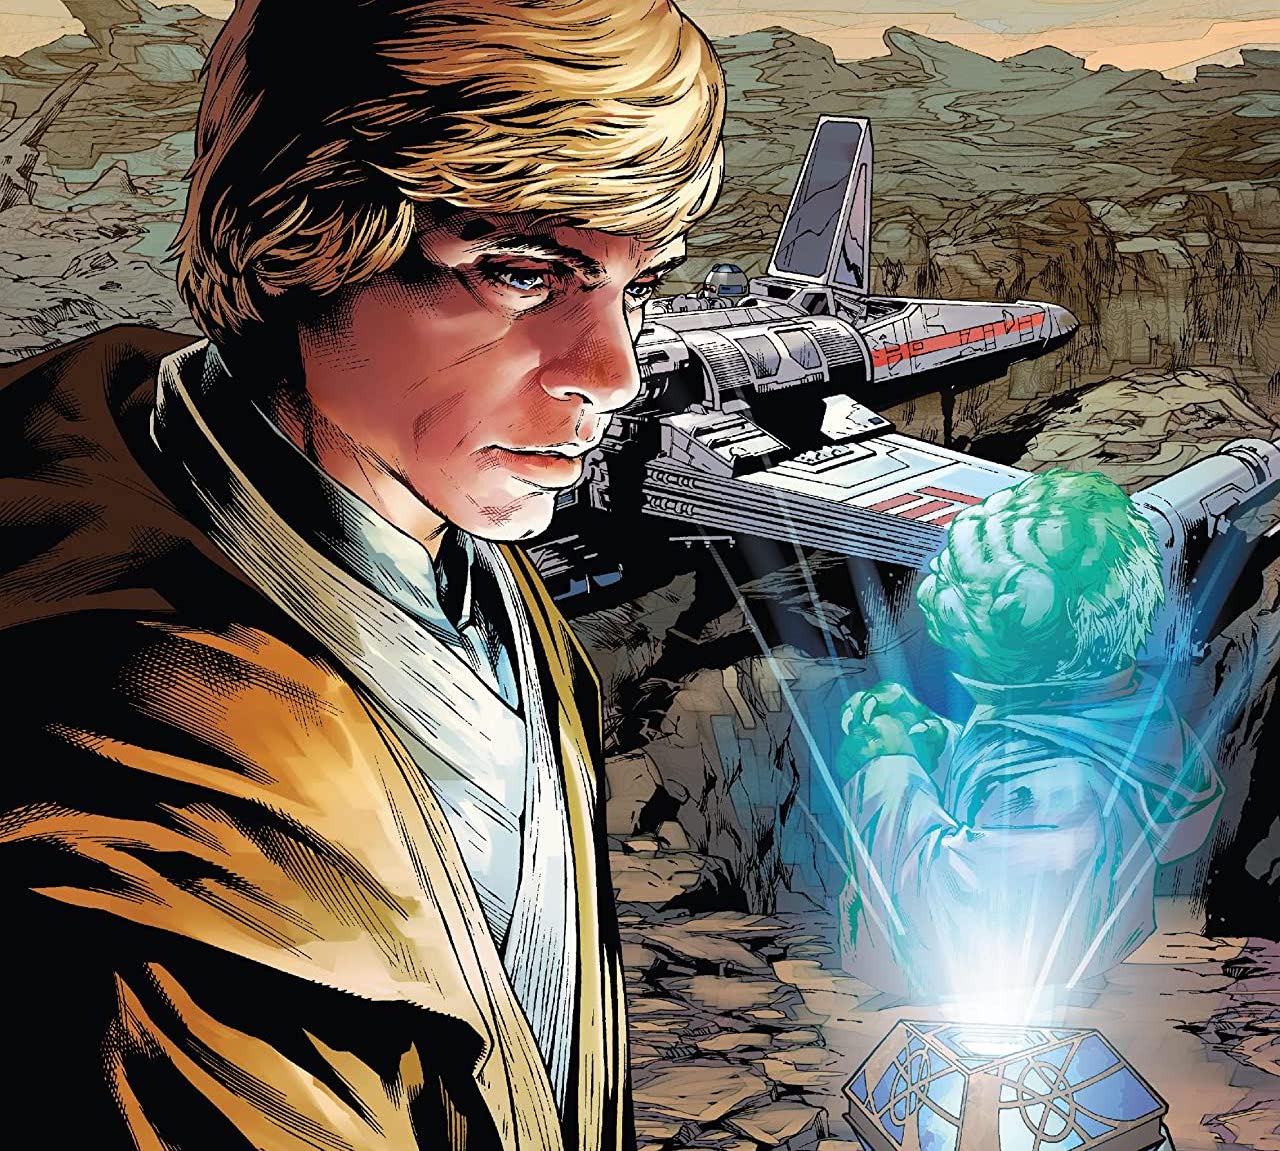 'Star Wars' #20 has smart science fiction ideas at work